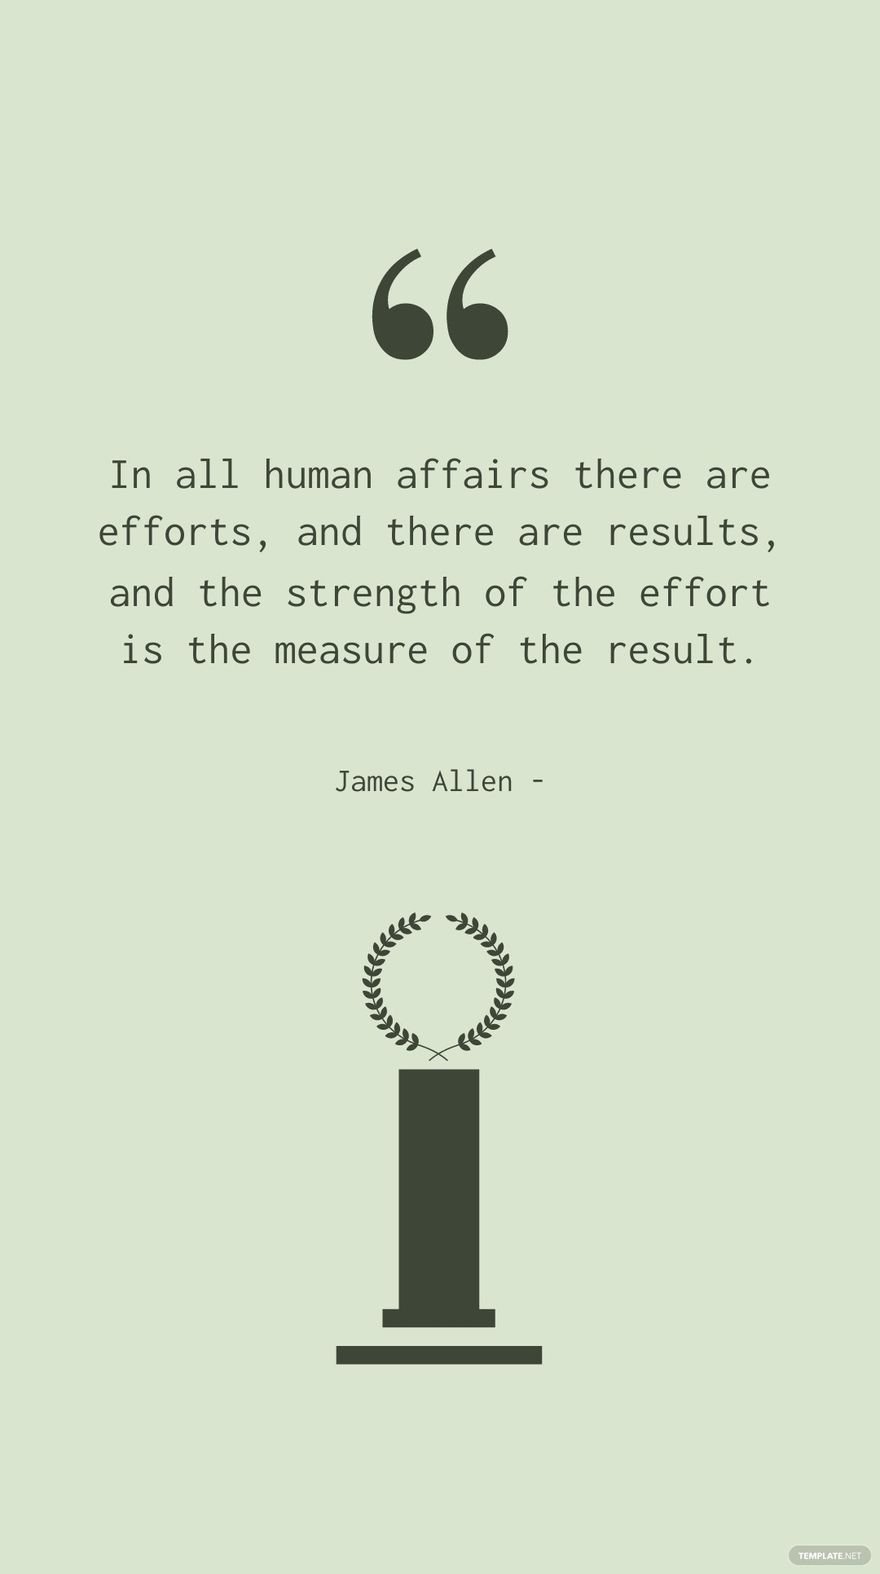 James Allen - In all human affairs there are efforts, and there are results, and the strength of the effort is the measure of the result.